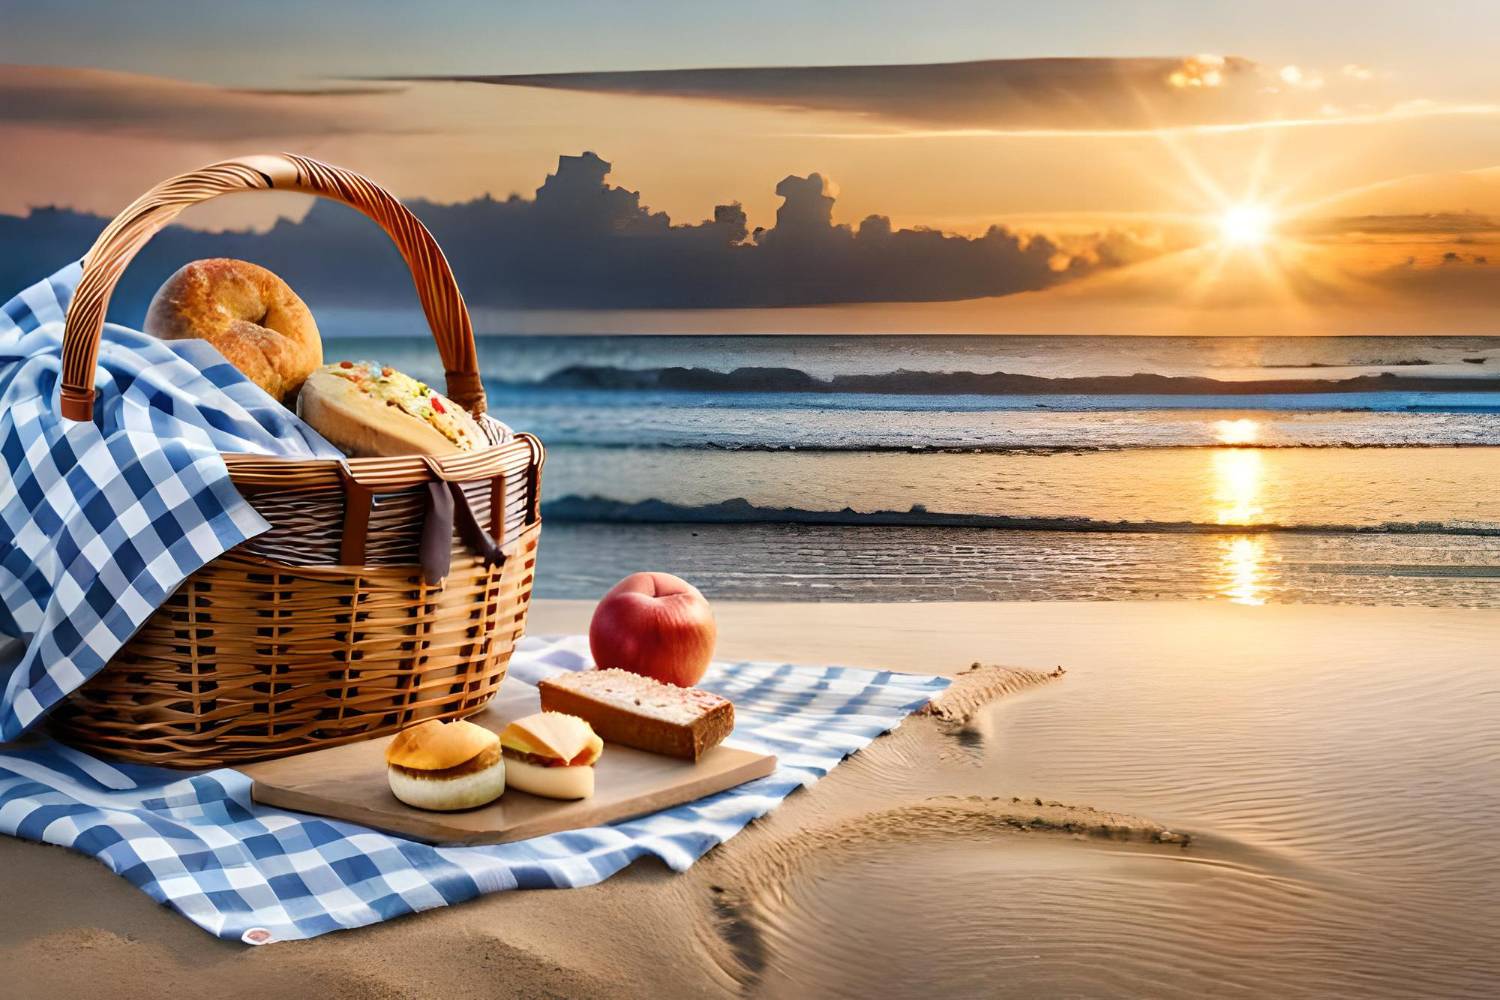 A picnic basket with bread on a blue-checked cloth by the seaside at sunrise.